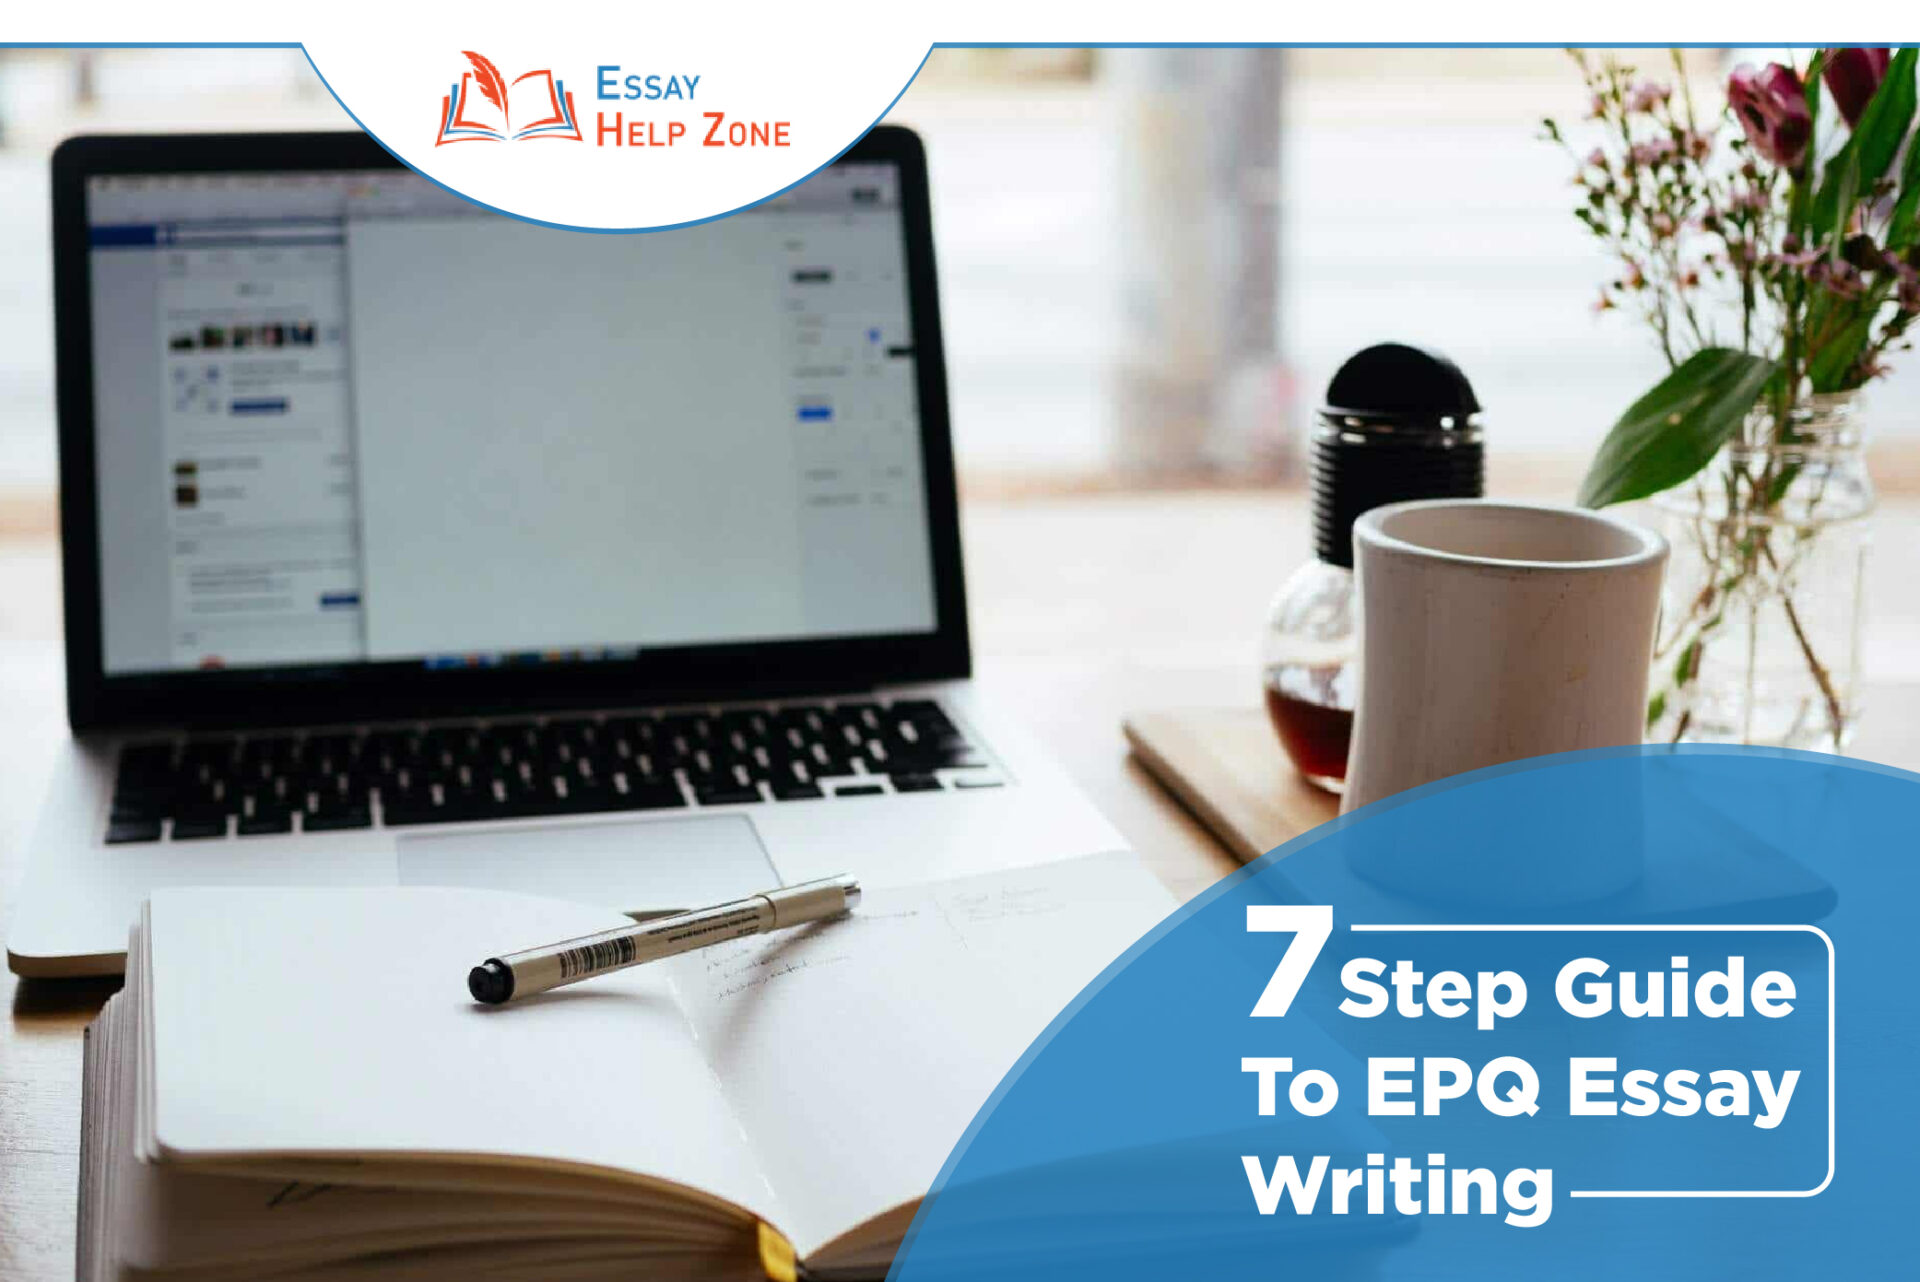 Top 10 Step Guide To EPQ Essay Writing 2021 Guide post thumbnail image